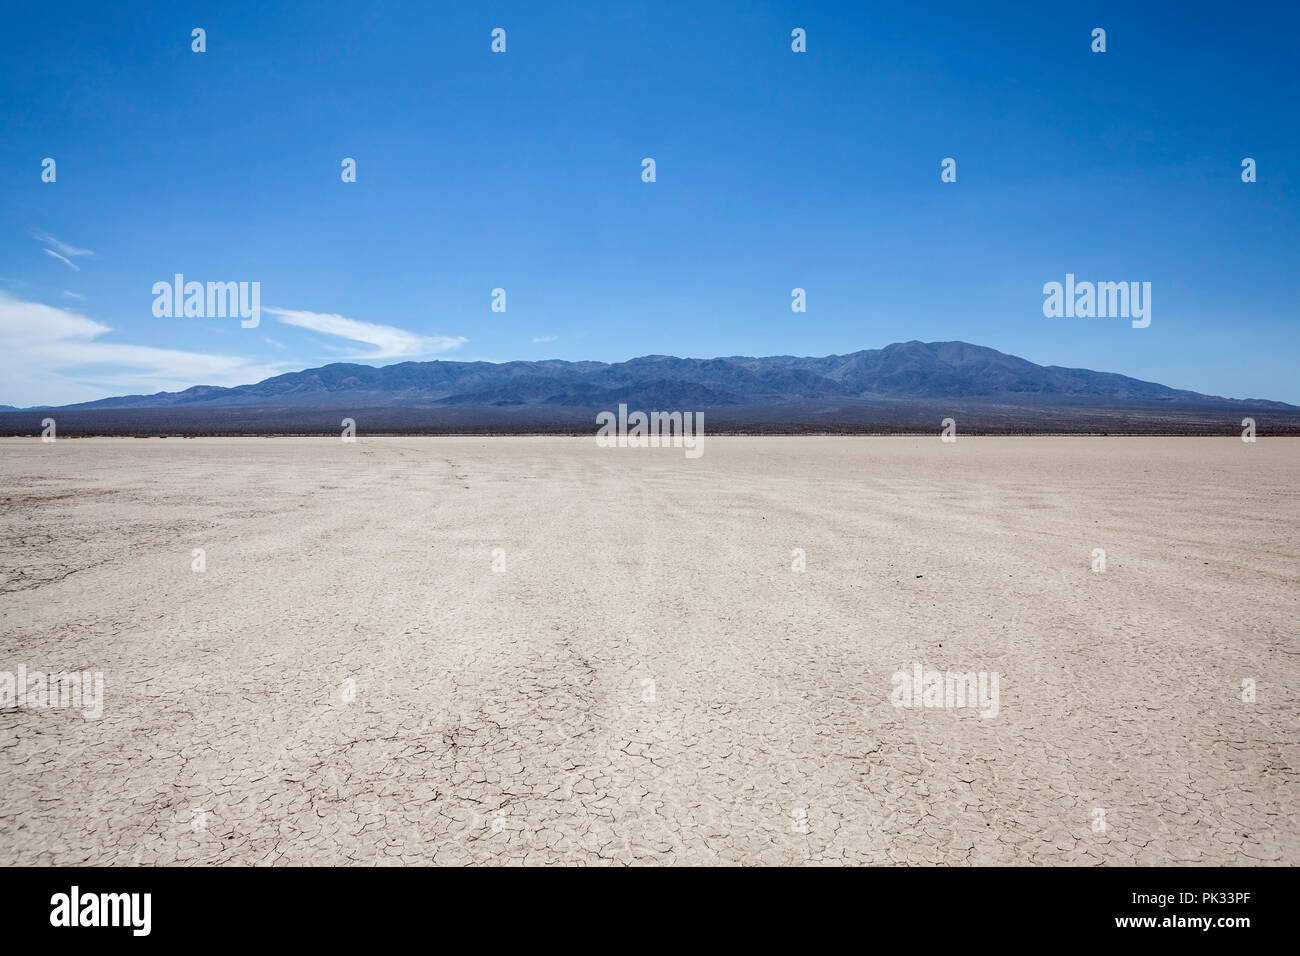 Mojave desert dry lake with mountain backdrop near Death Valley in California. Stock Photo